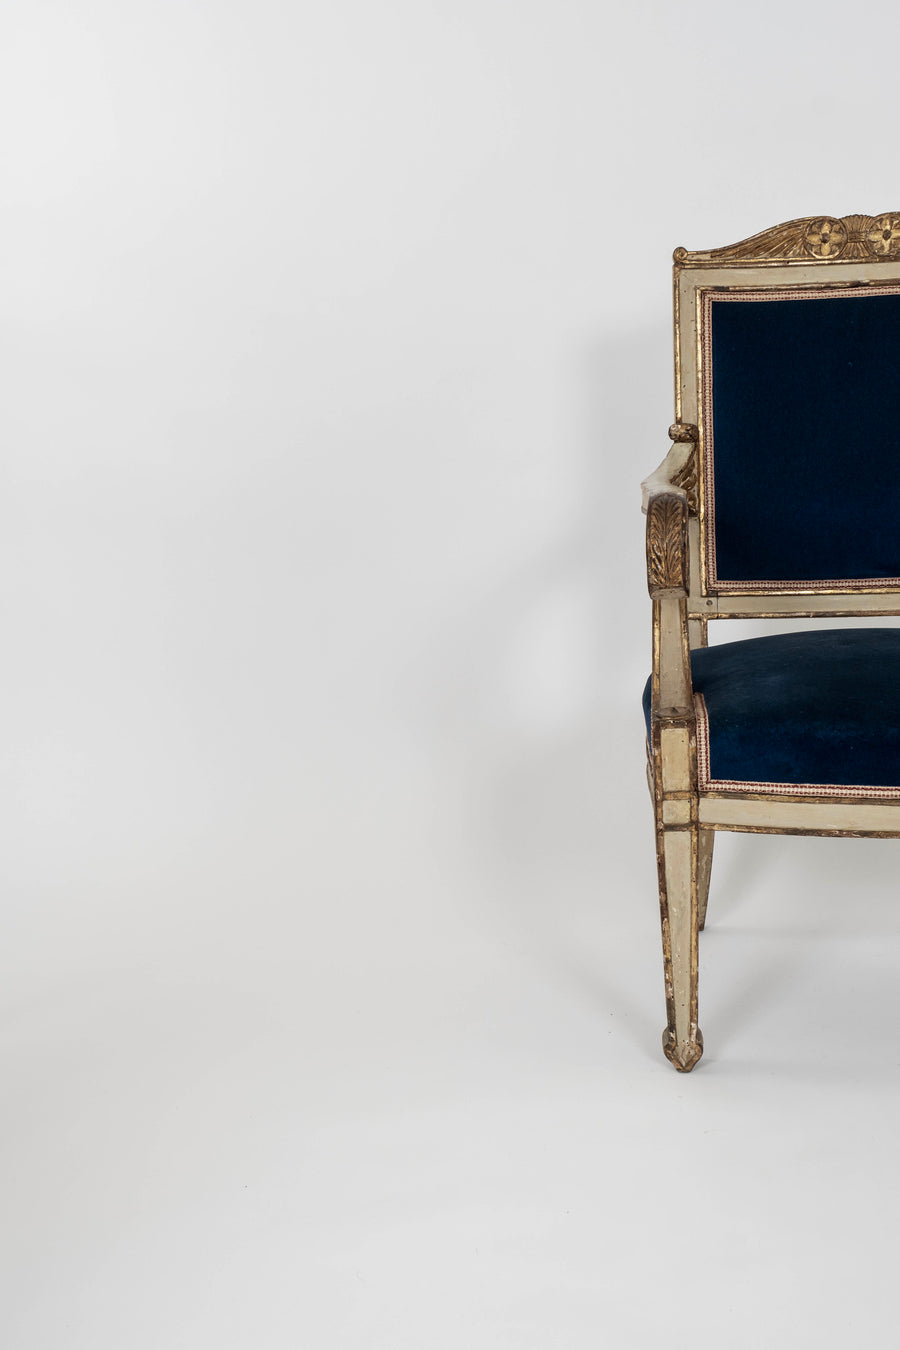 Pair of Italian 18th Century Neoclassical Painted Parcel Gilt Armchairs